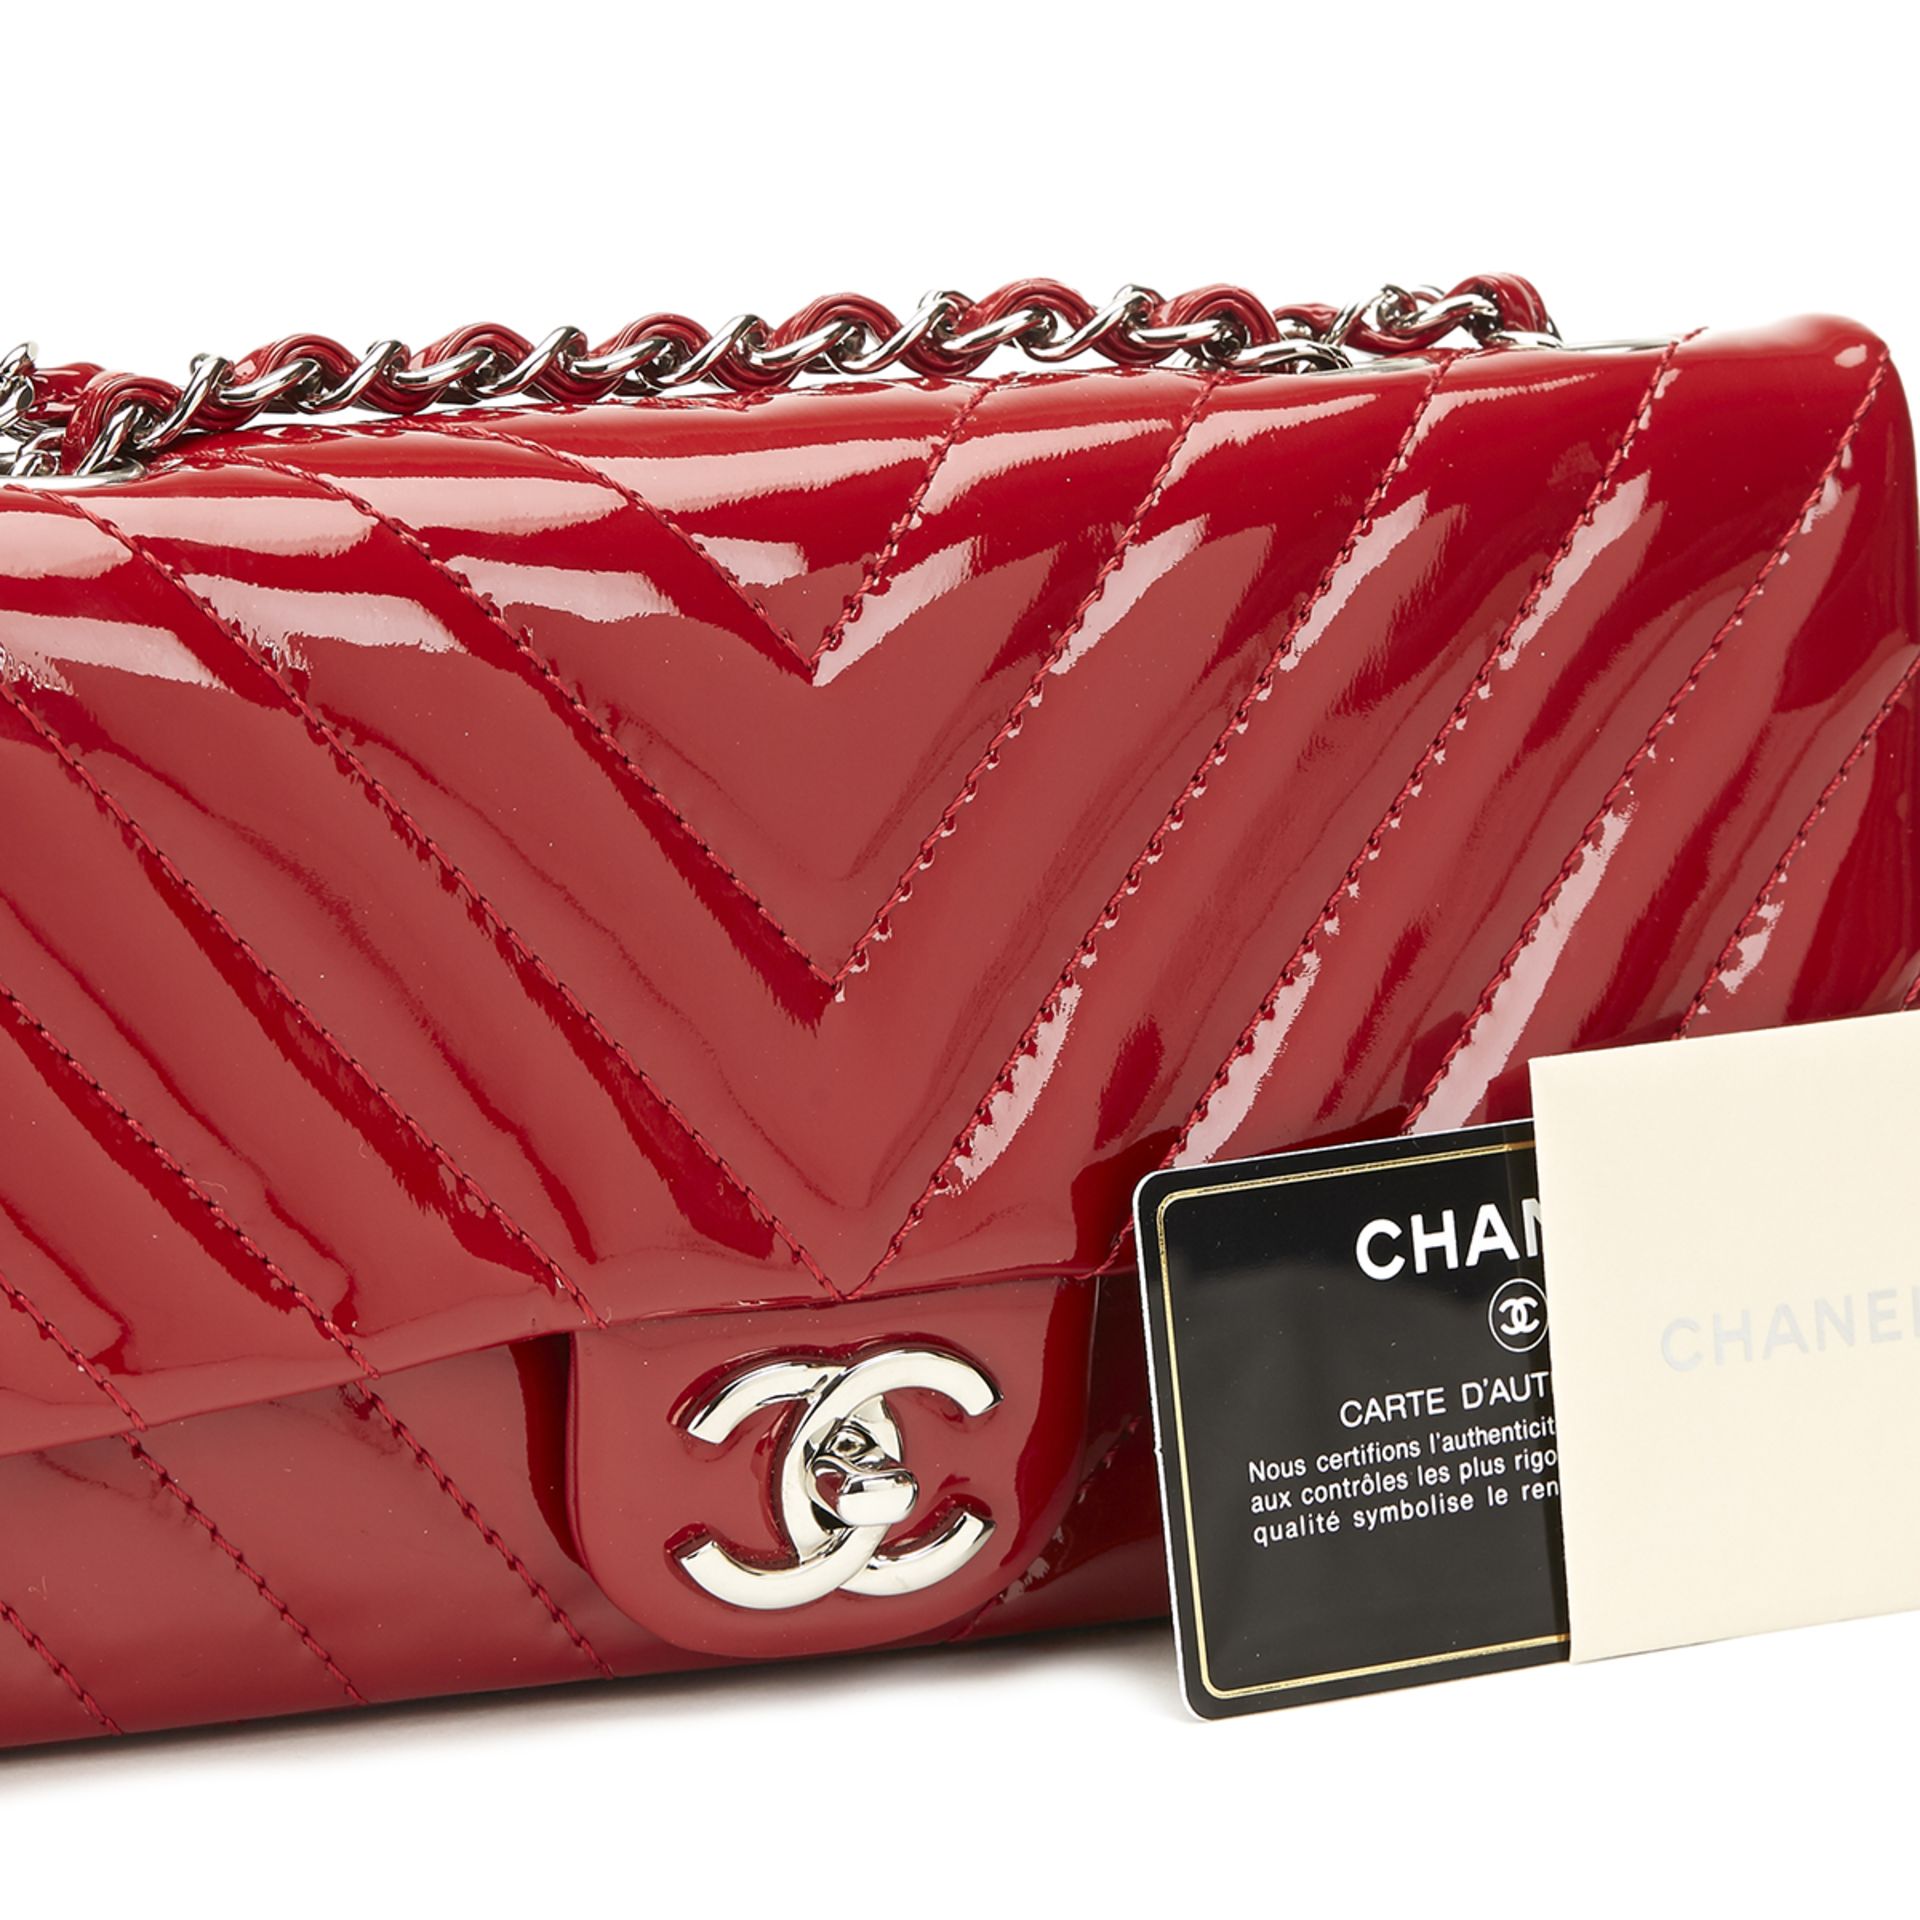 CHANEL East West Classic Single Flap Bag - Image 9 of 9